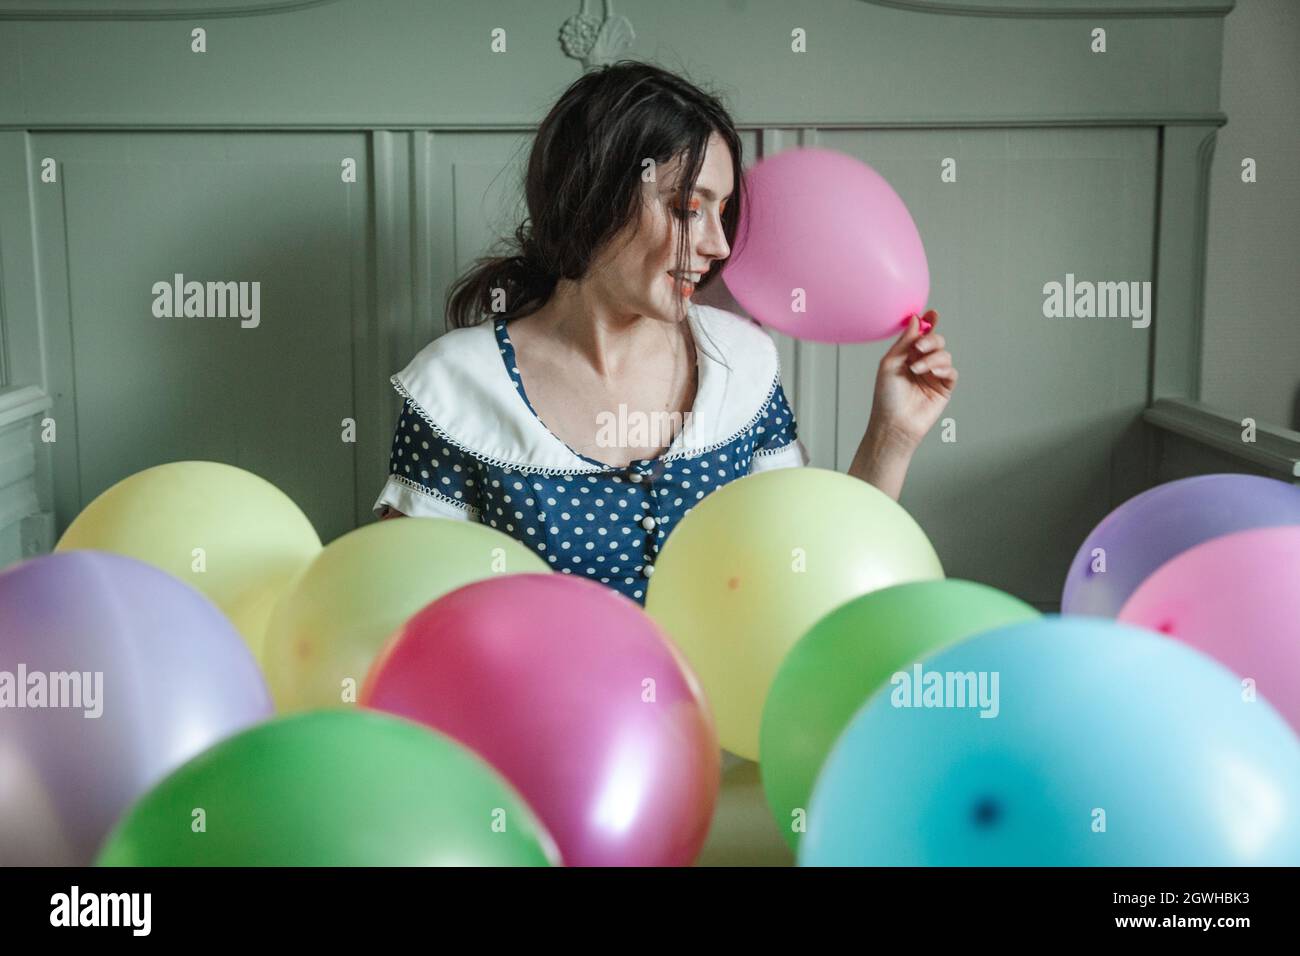 Full Length Of Woman Colorful Balloons Stock Photo Alamy